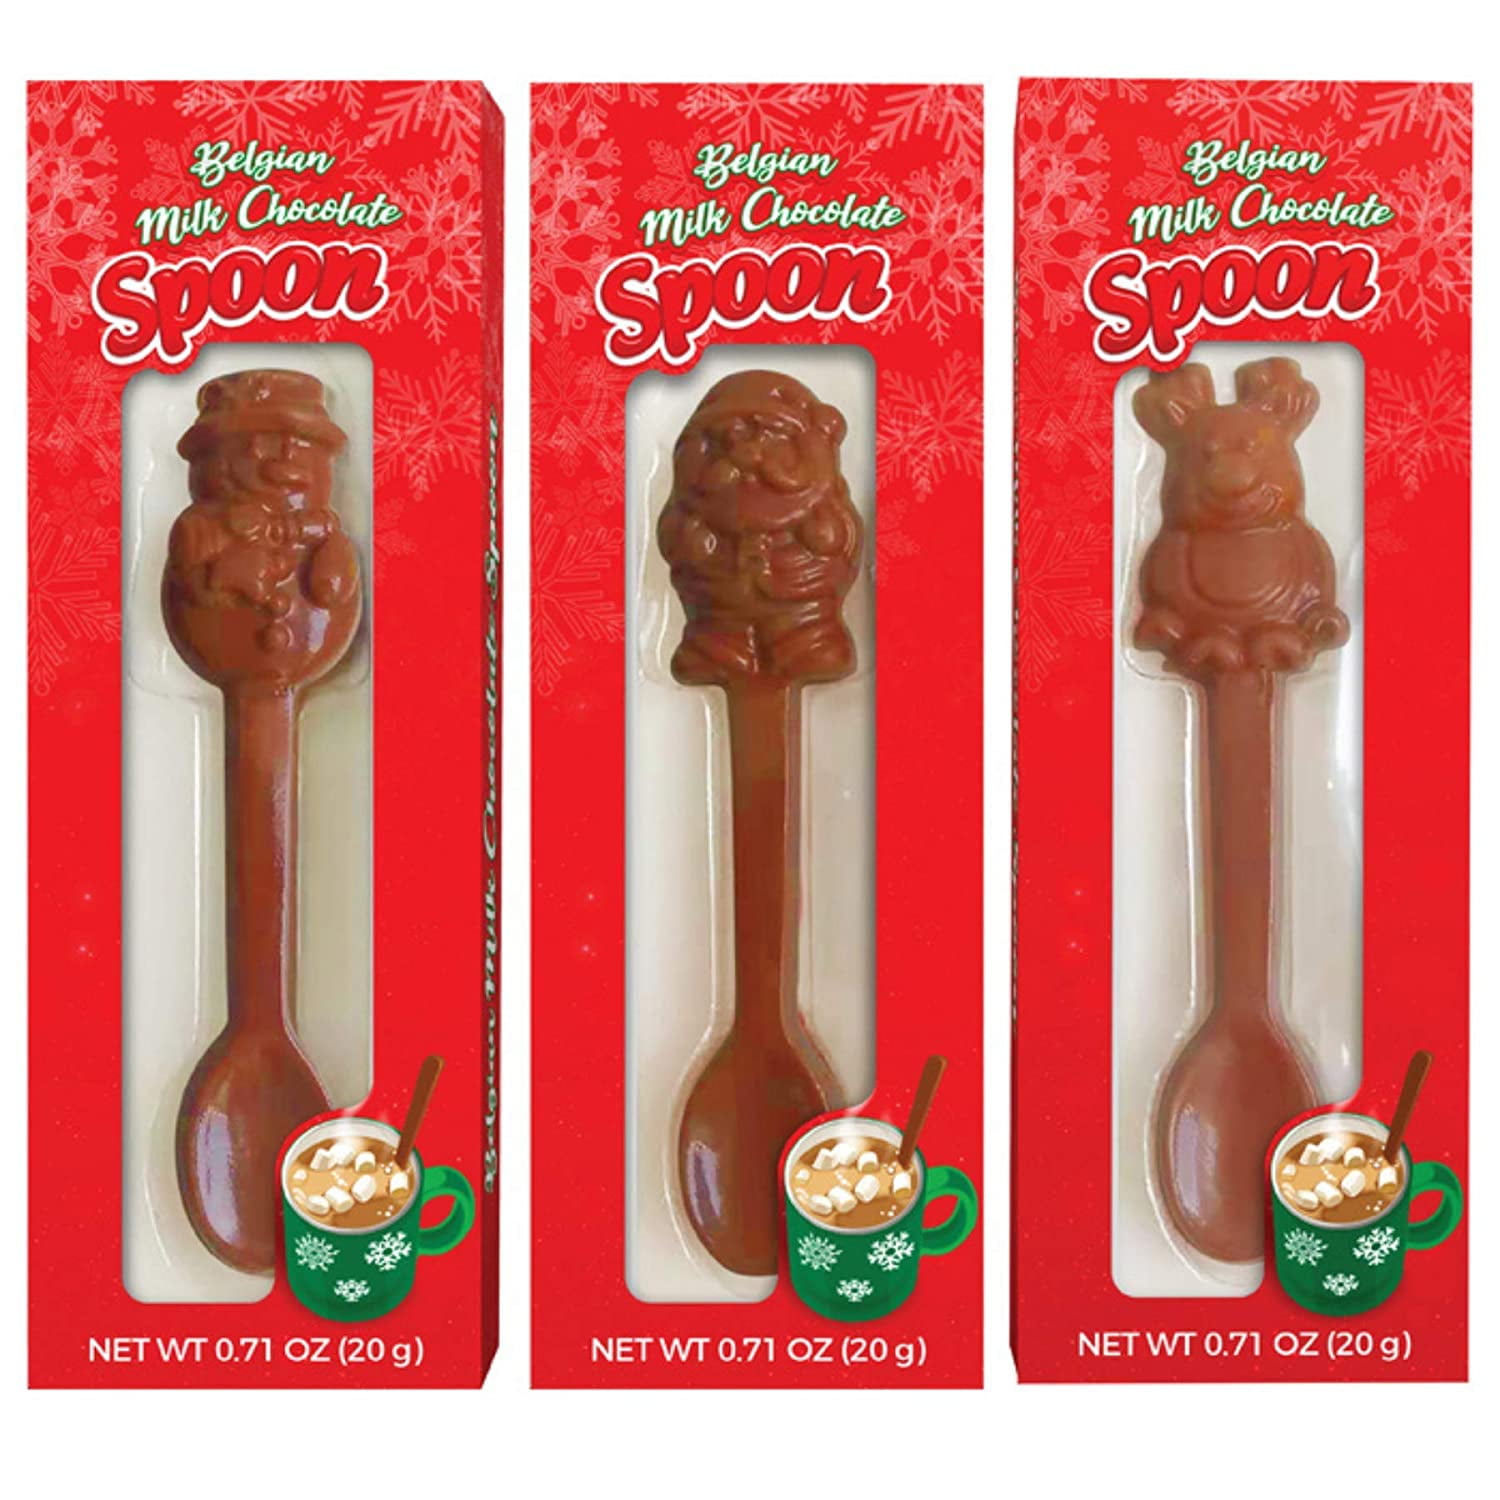 Hot Chocolate Spoons by Chocolate Works, Flavor Variety Pack - Belgian Dark  Chocolate, Milk Chocolate & Marshmallows, Peppermint, Cocoa Bomb for Hot